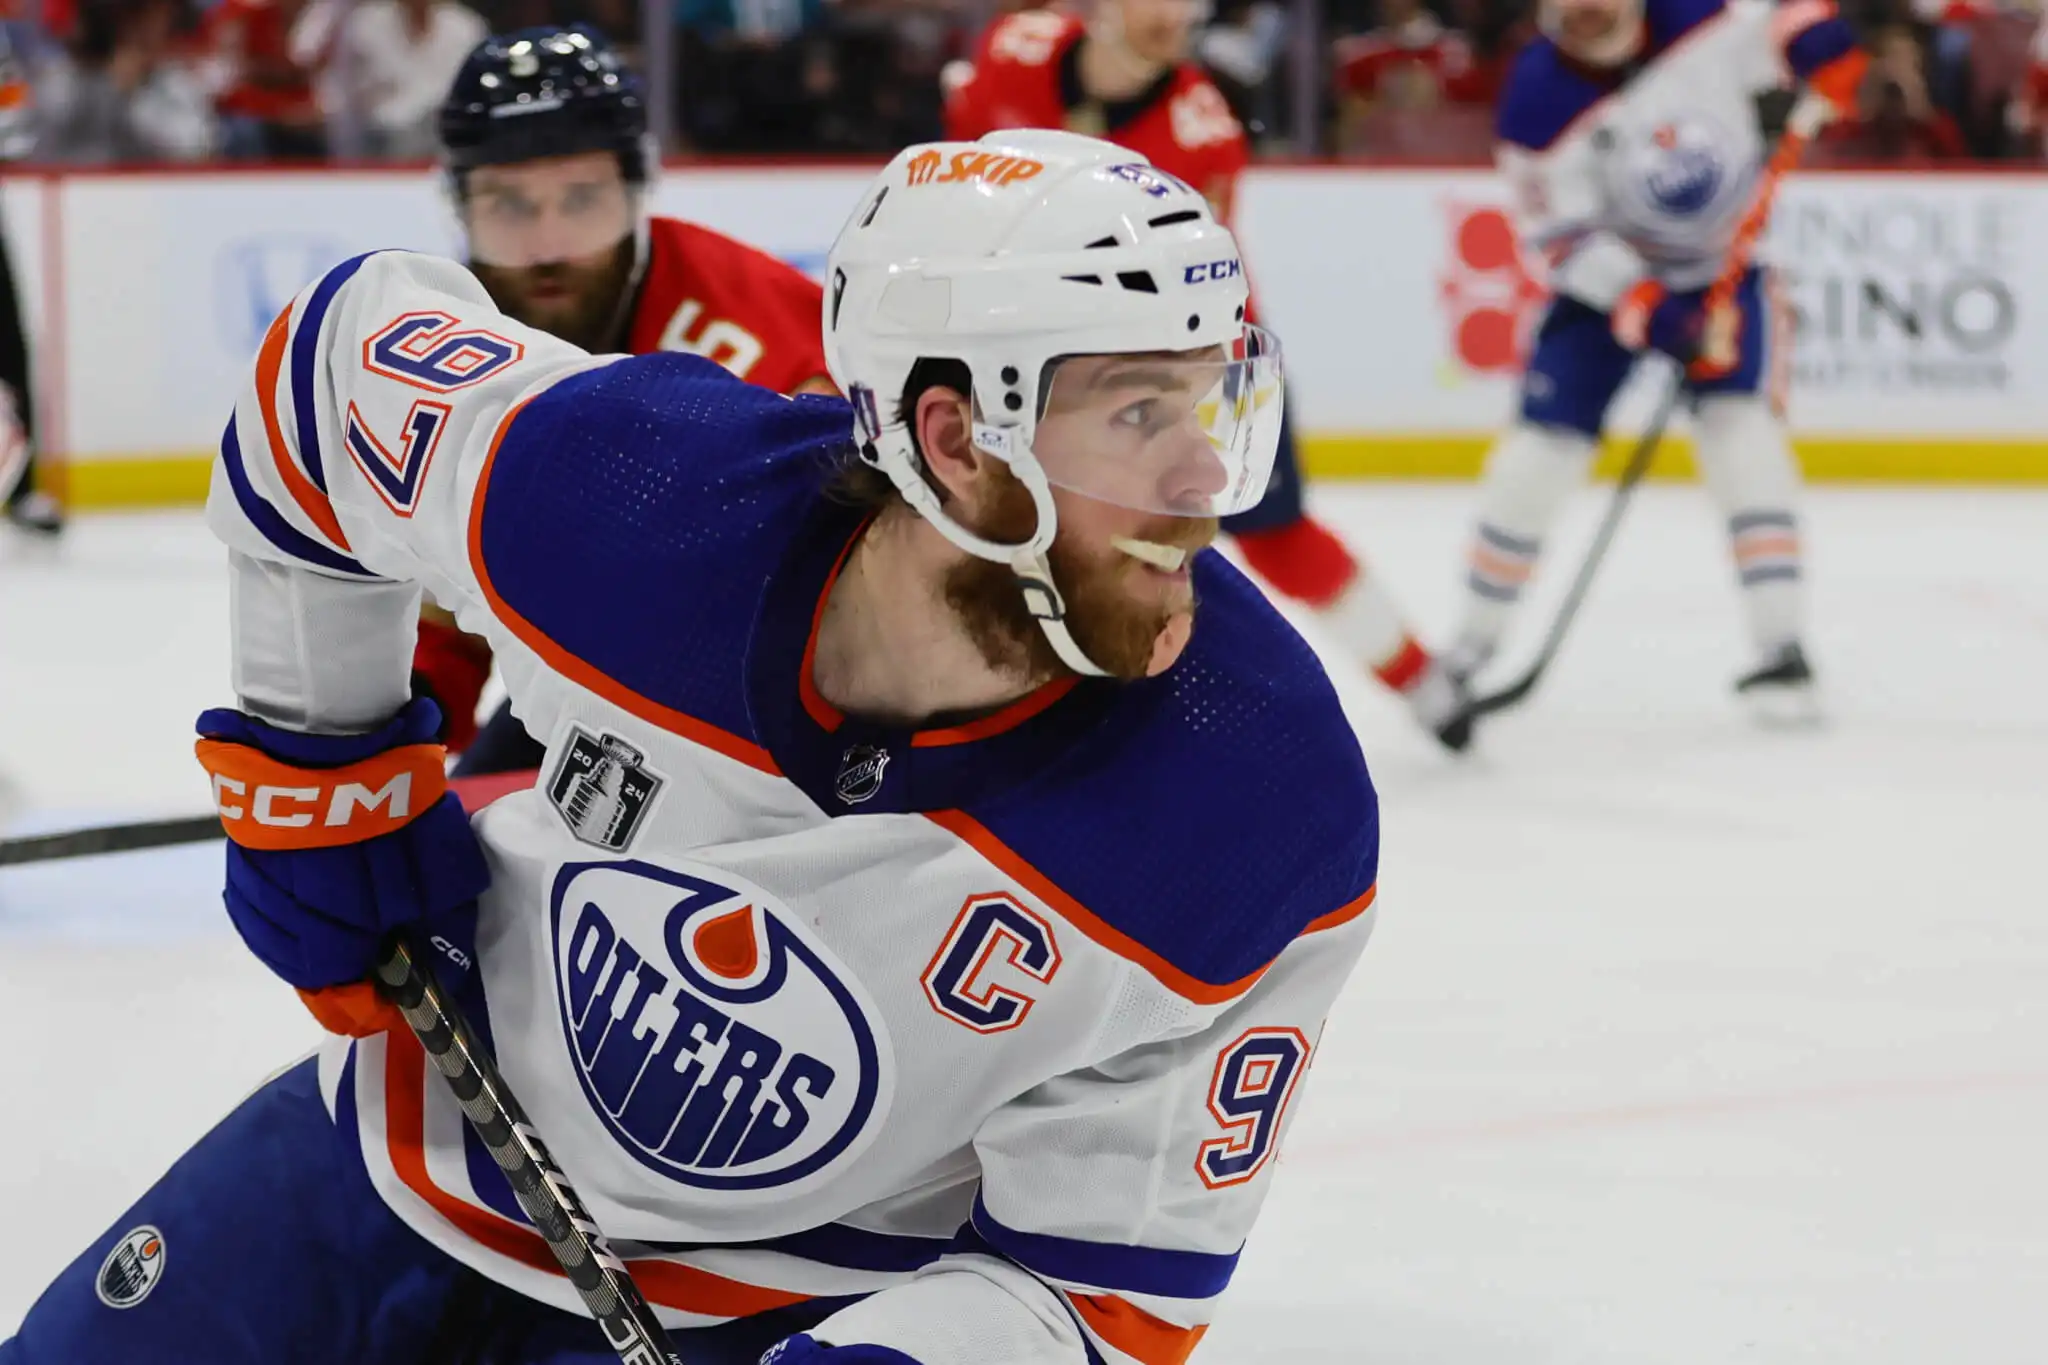 Updated Conn Smythe Odds: Connor McDavid Now Heavy Favorite